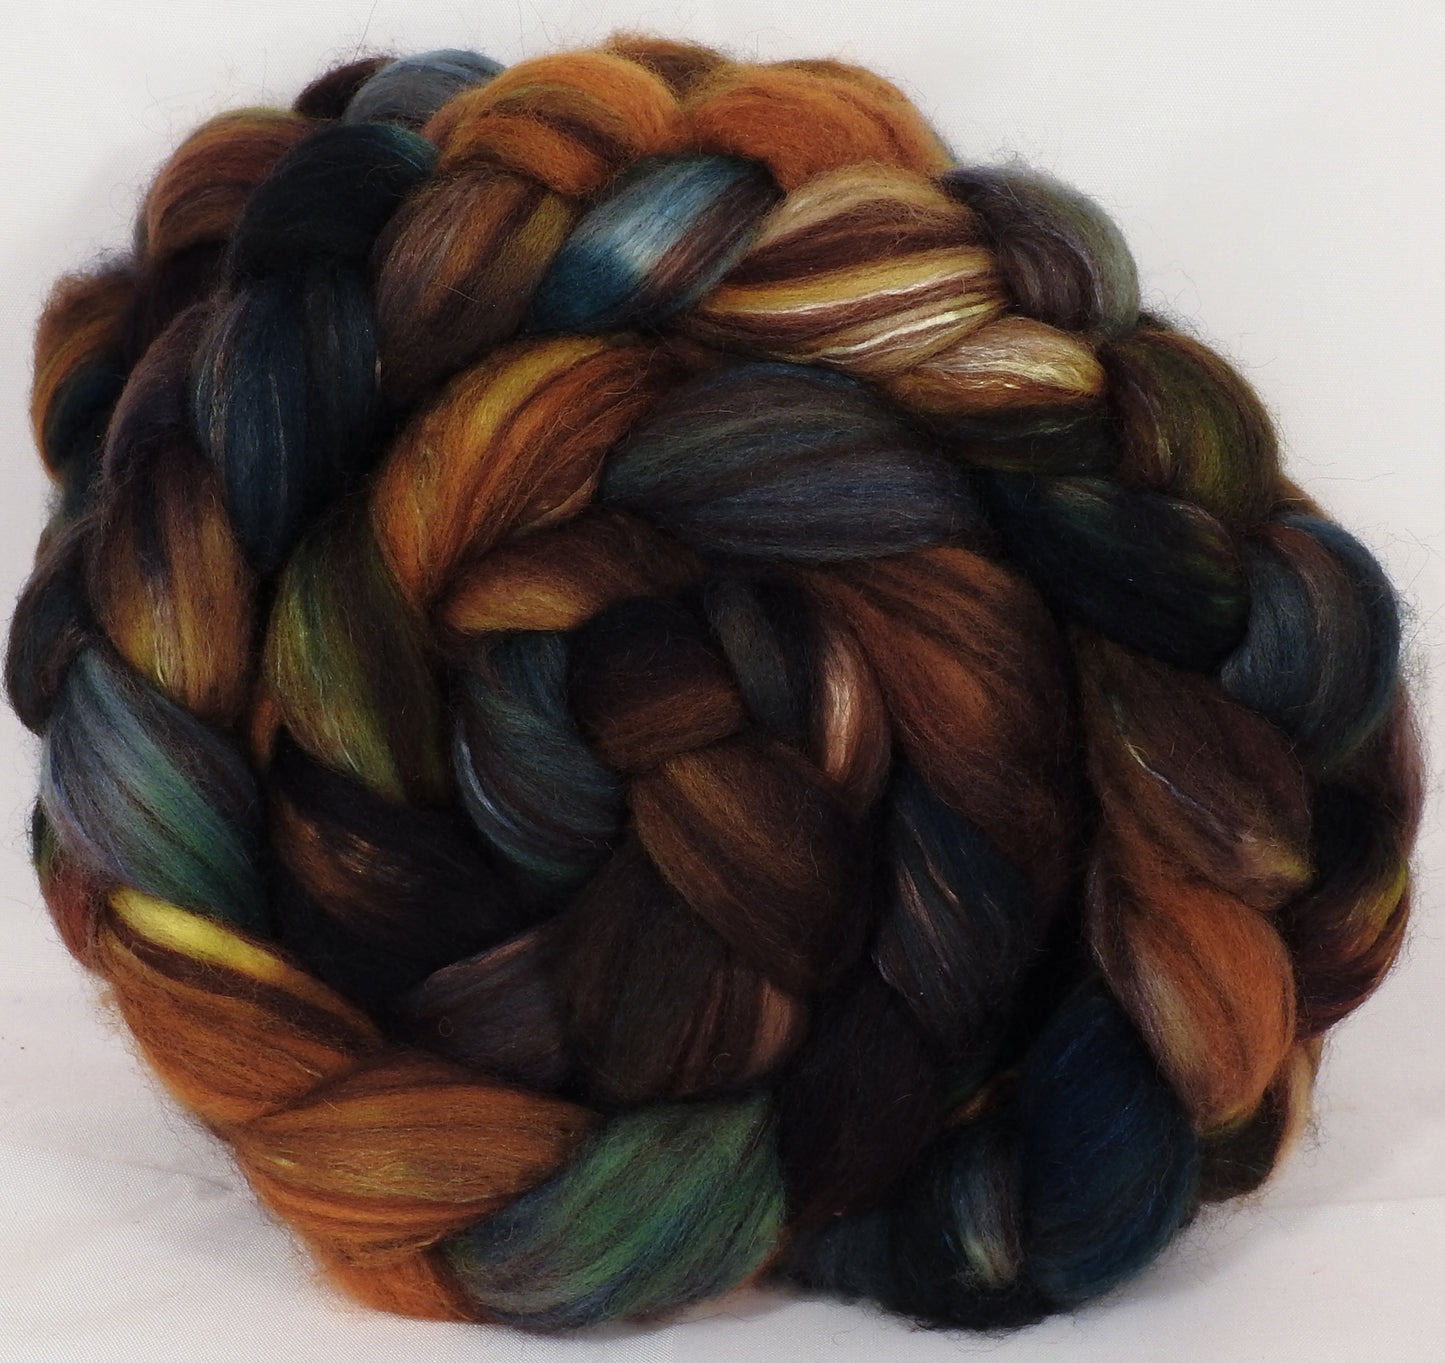 Hand dyed top for spinning -Fossil- (4.6 oz.) 18.5 mic merino/ camel/ brown alpaca/ mulberry silk/ (40/20/20/20) - Inglenook Fibers